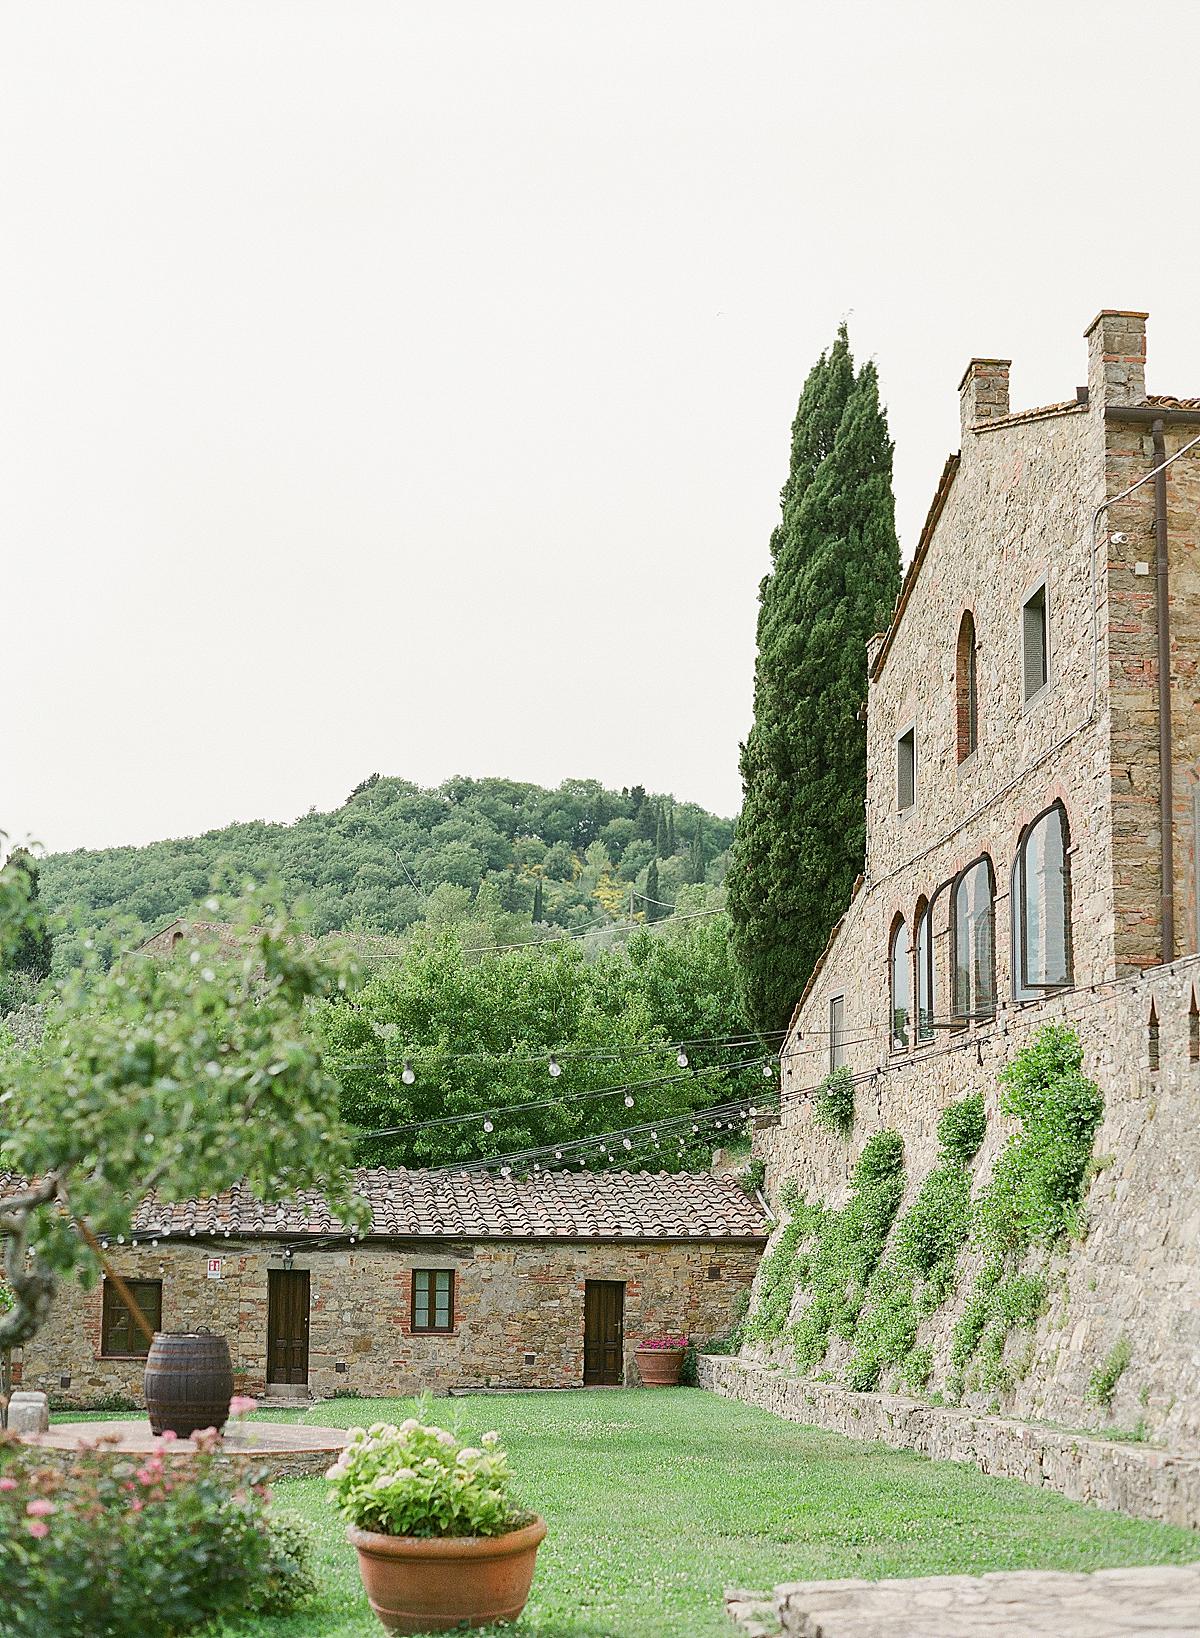 How to choose your wedding venue in Tuscany: A checklist with things to